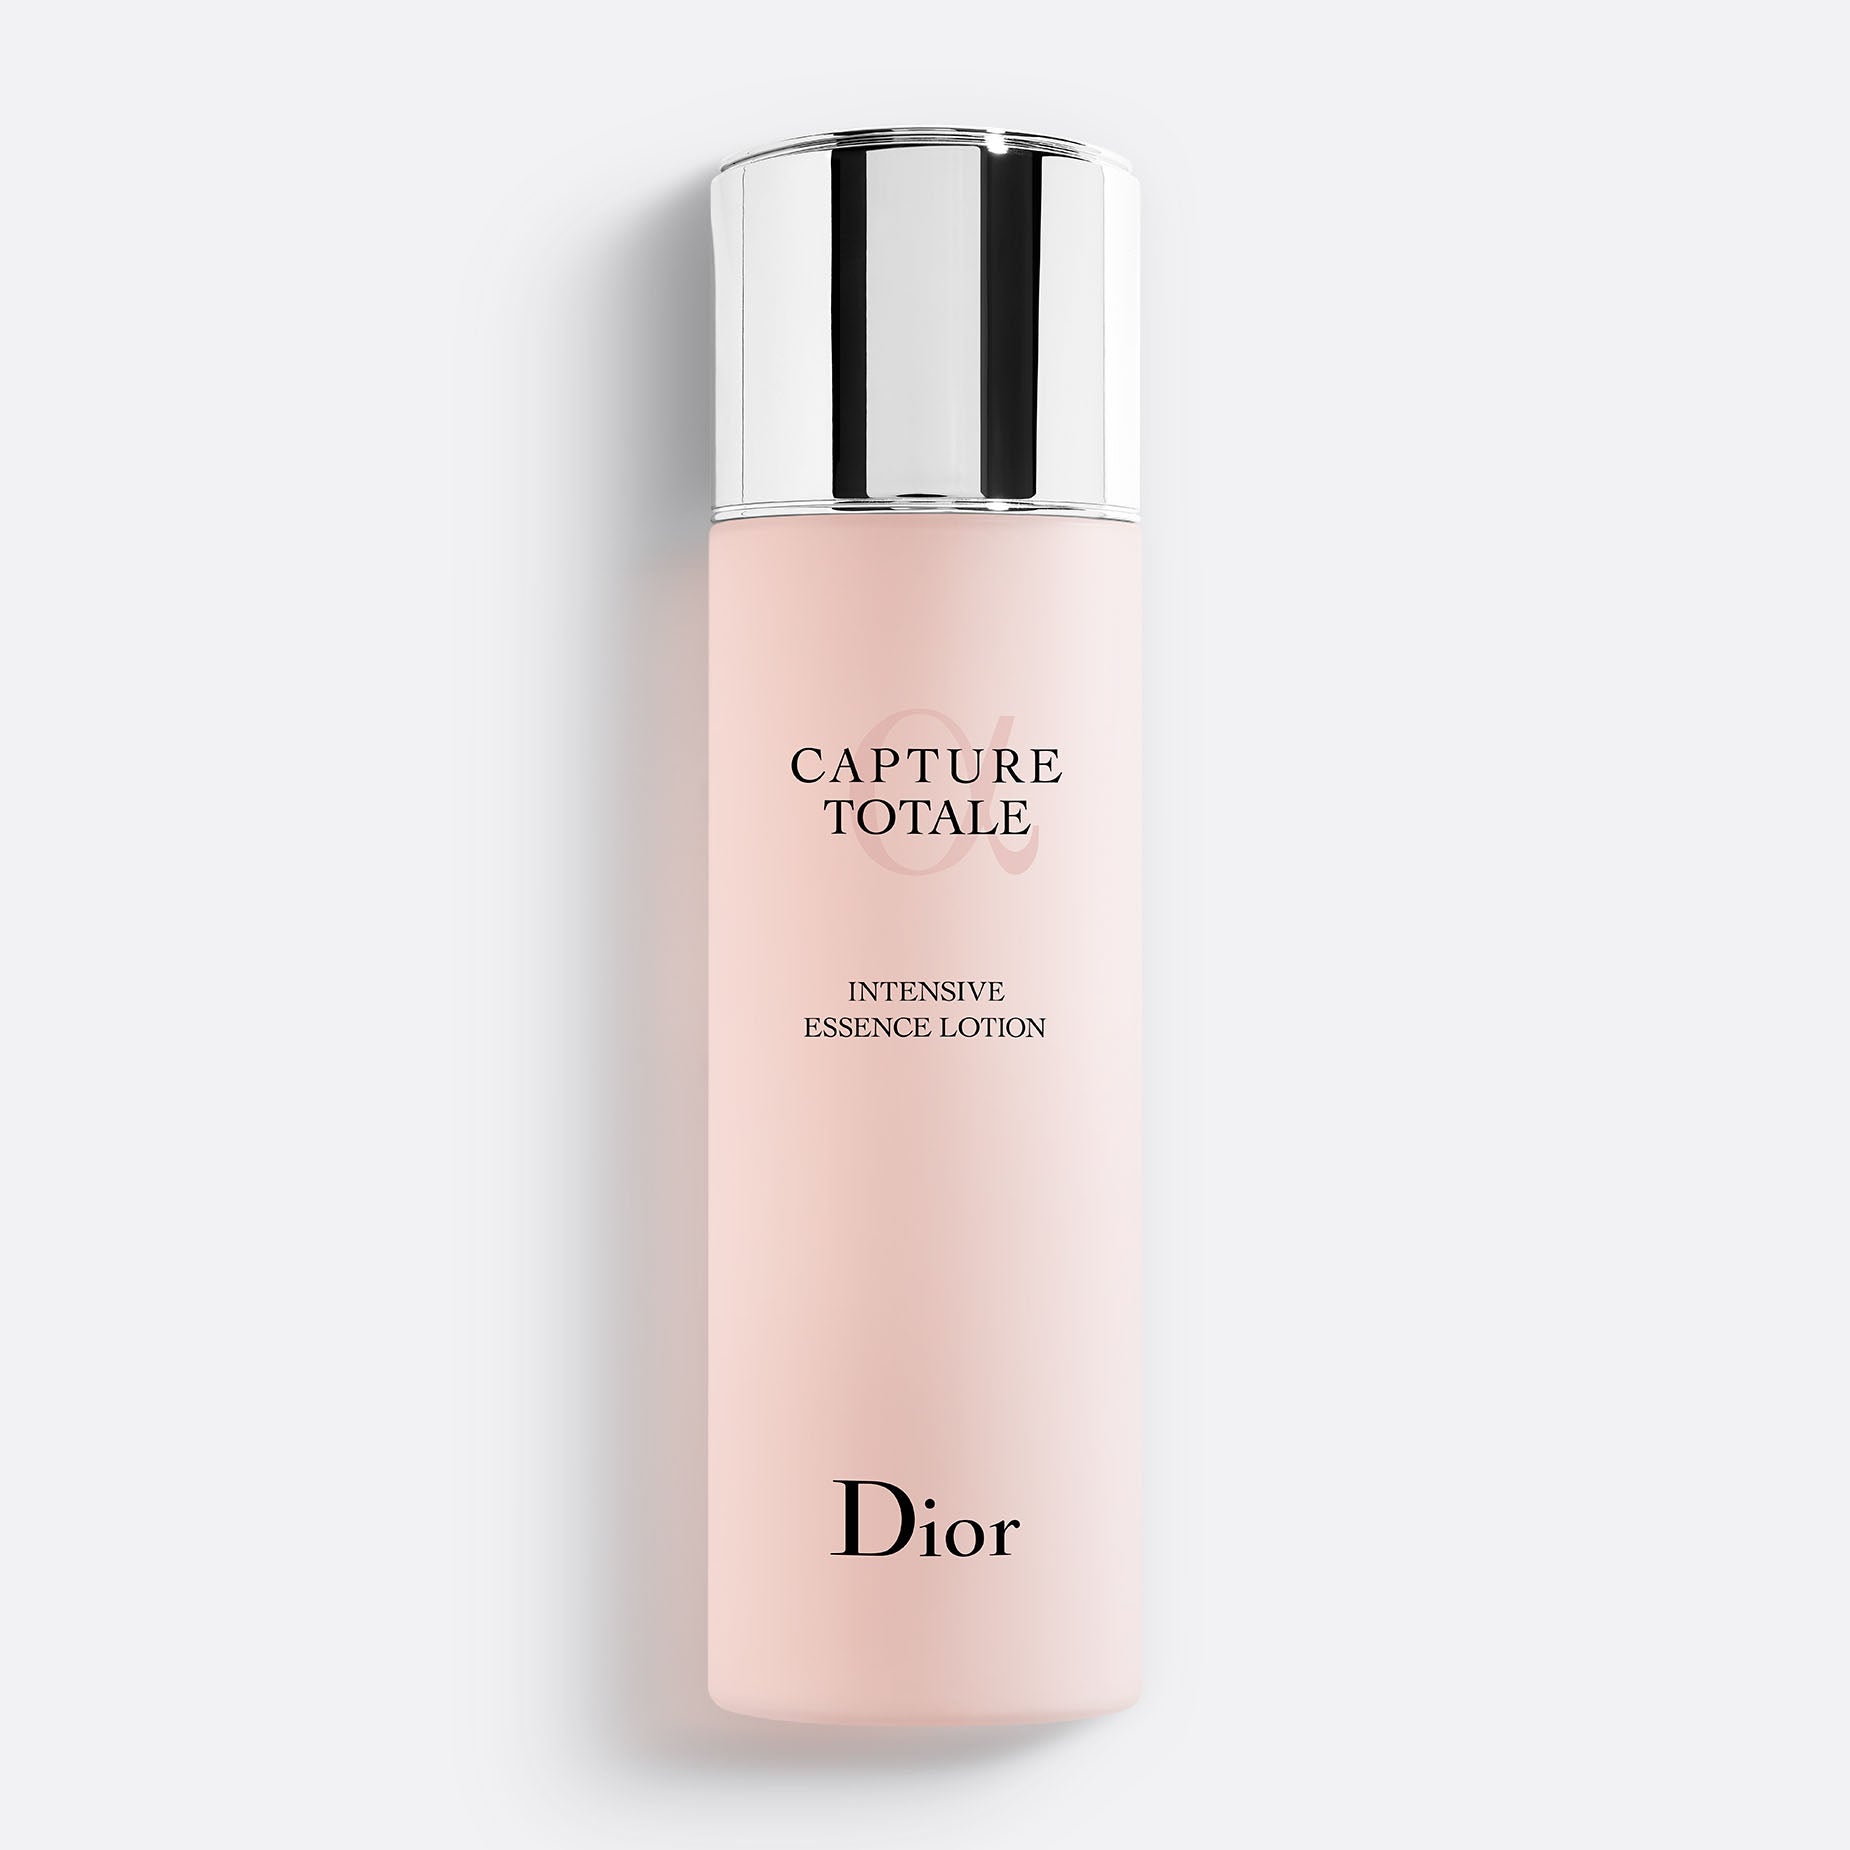 Shop Dior Beauty Products in Singapore – Dior Beauty Online Boutique  Singapore